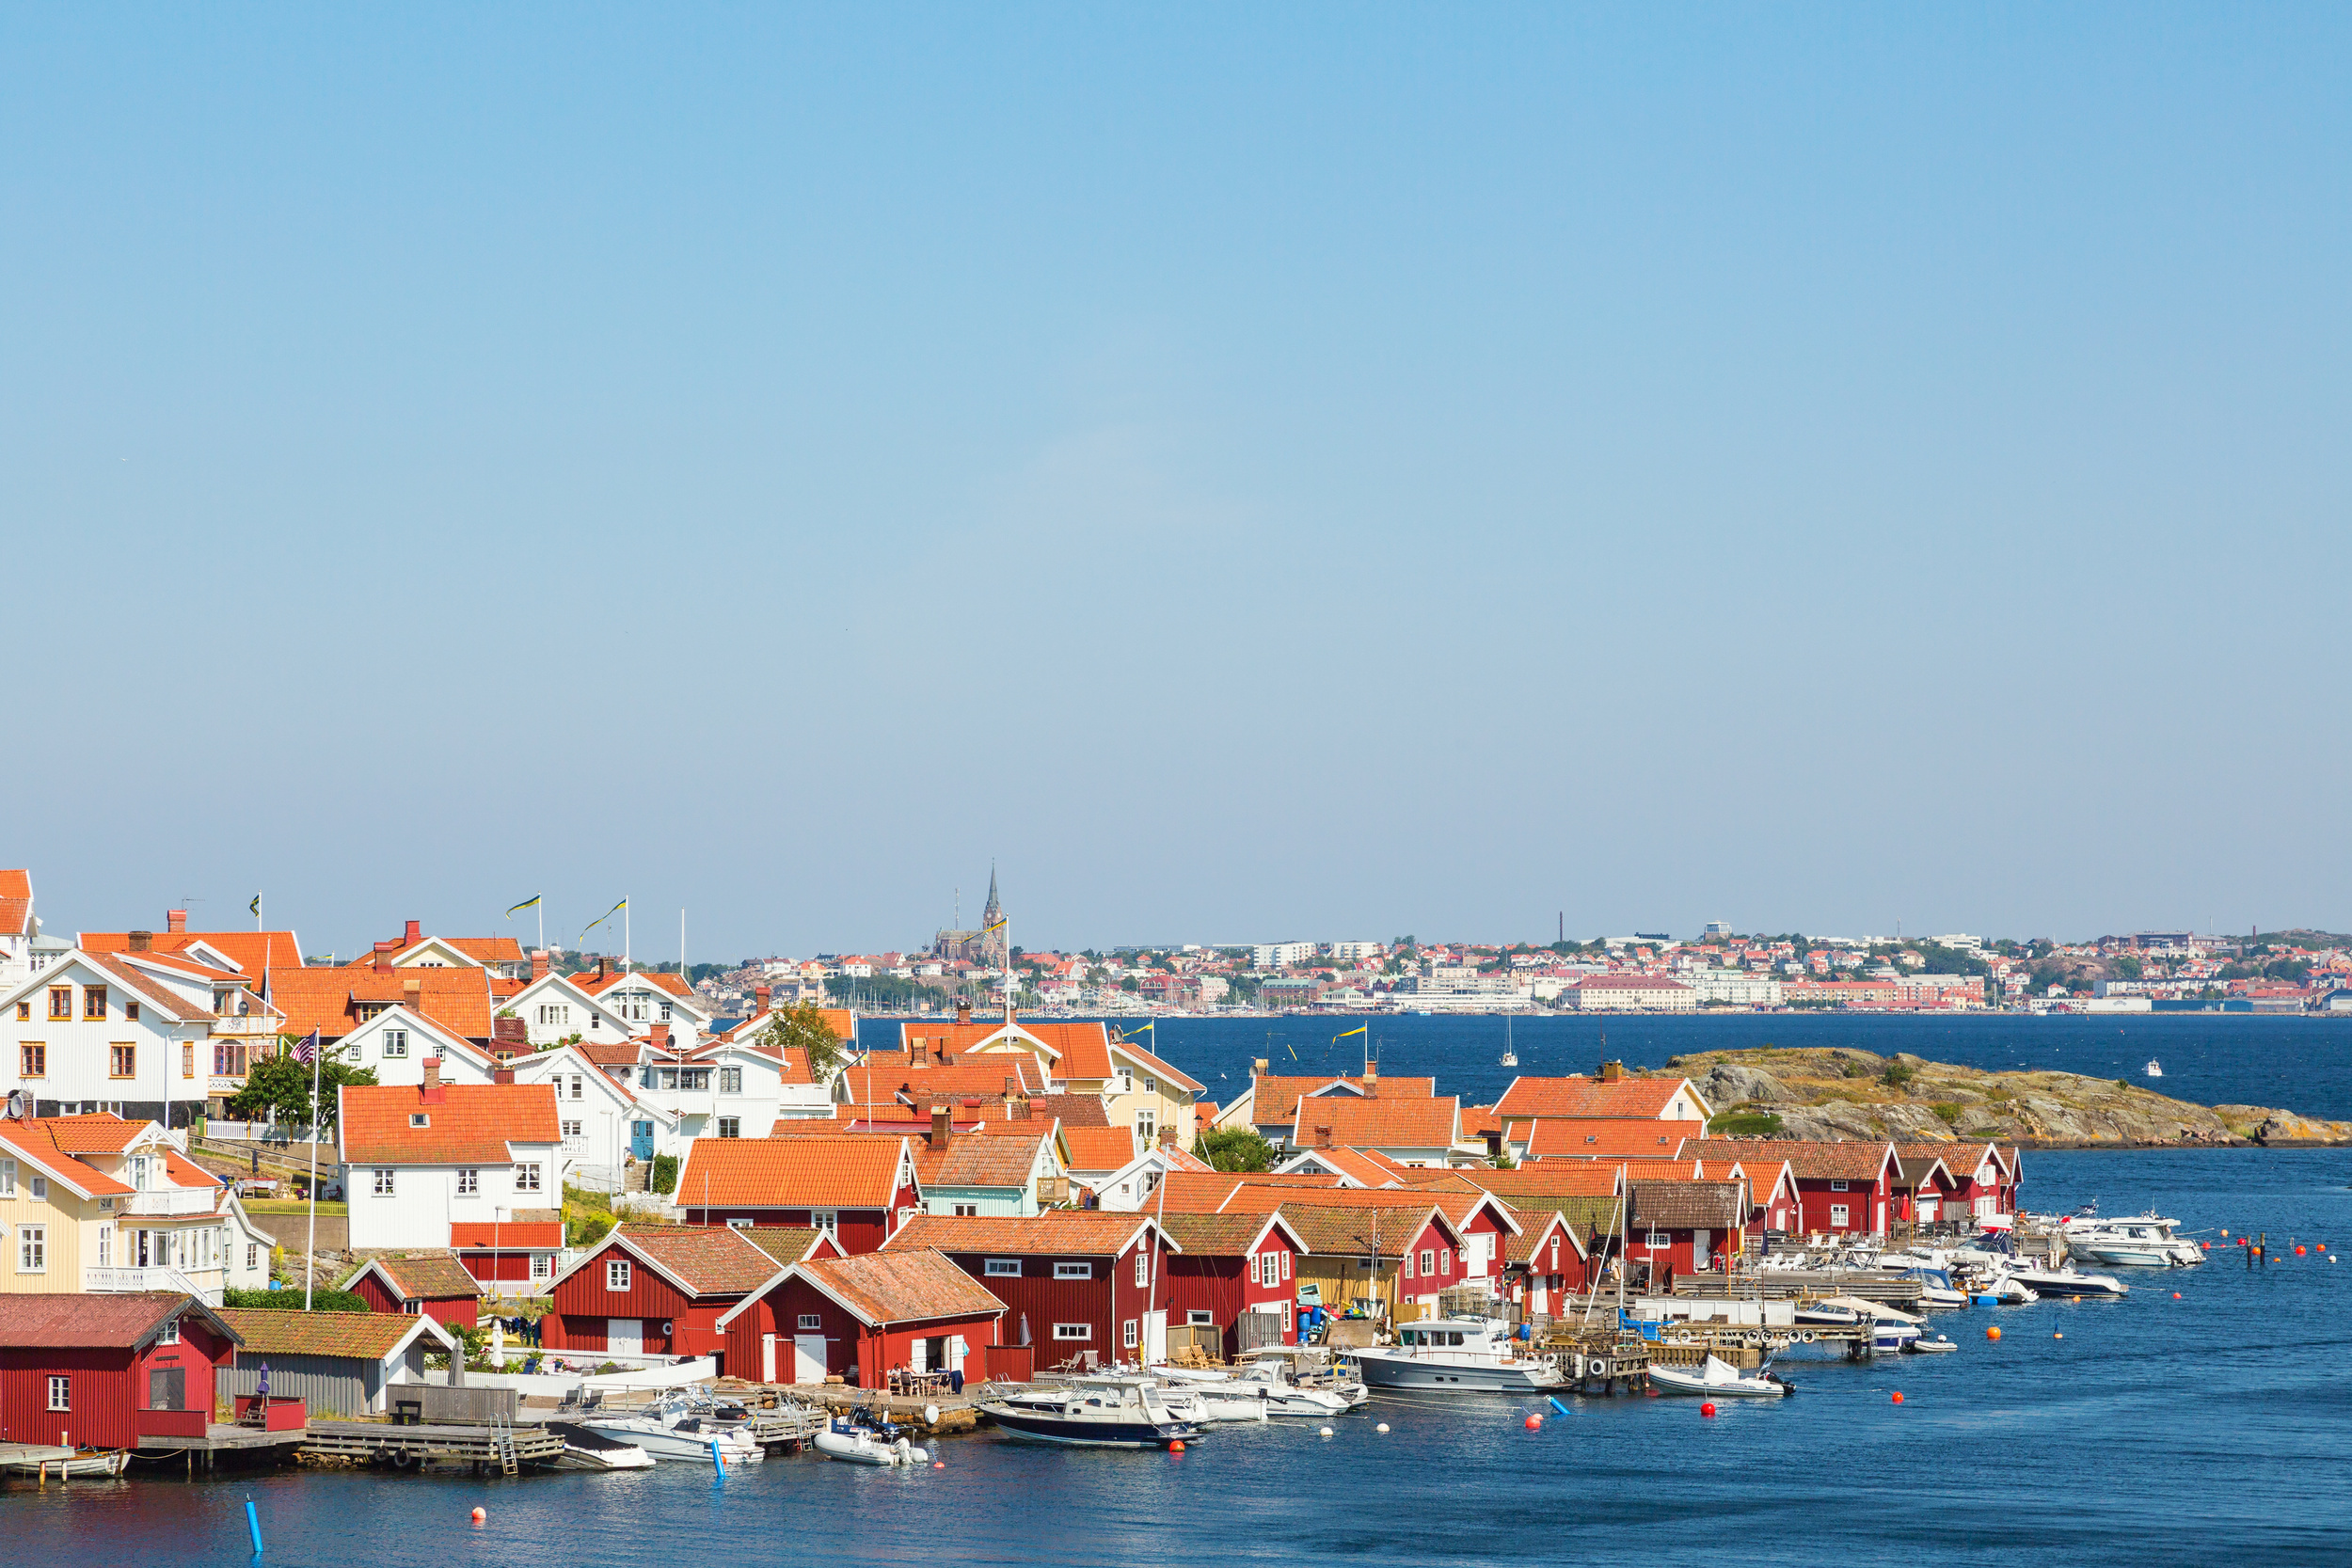 <p>Sweden’s west coast is a beautiful part of the country, with amazing cities such as Malmo and Gothenburg. However, plenty of smaller towns, beaches, and lakes await you in this epic part of the country.</p><p><a href='https://www.msn.com/en-us/community/channel/vid-cj9pqbr0vn9in2b6ddcd8sfgpfq6x6utp44fssrv6mc2gtybw0us'>Follow us on MSN to see more of our exclusive lifestyle content.</a></p>